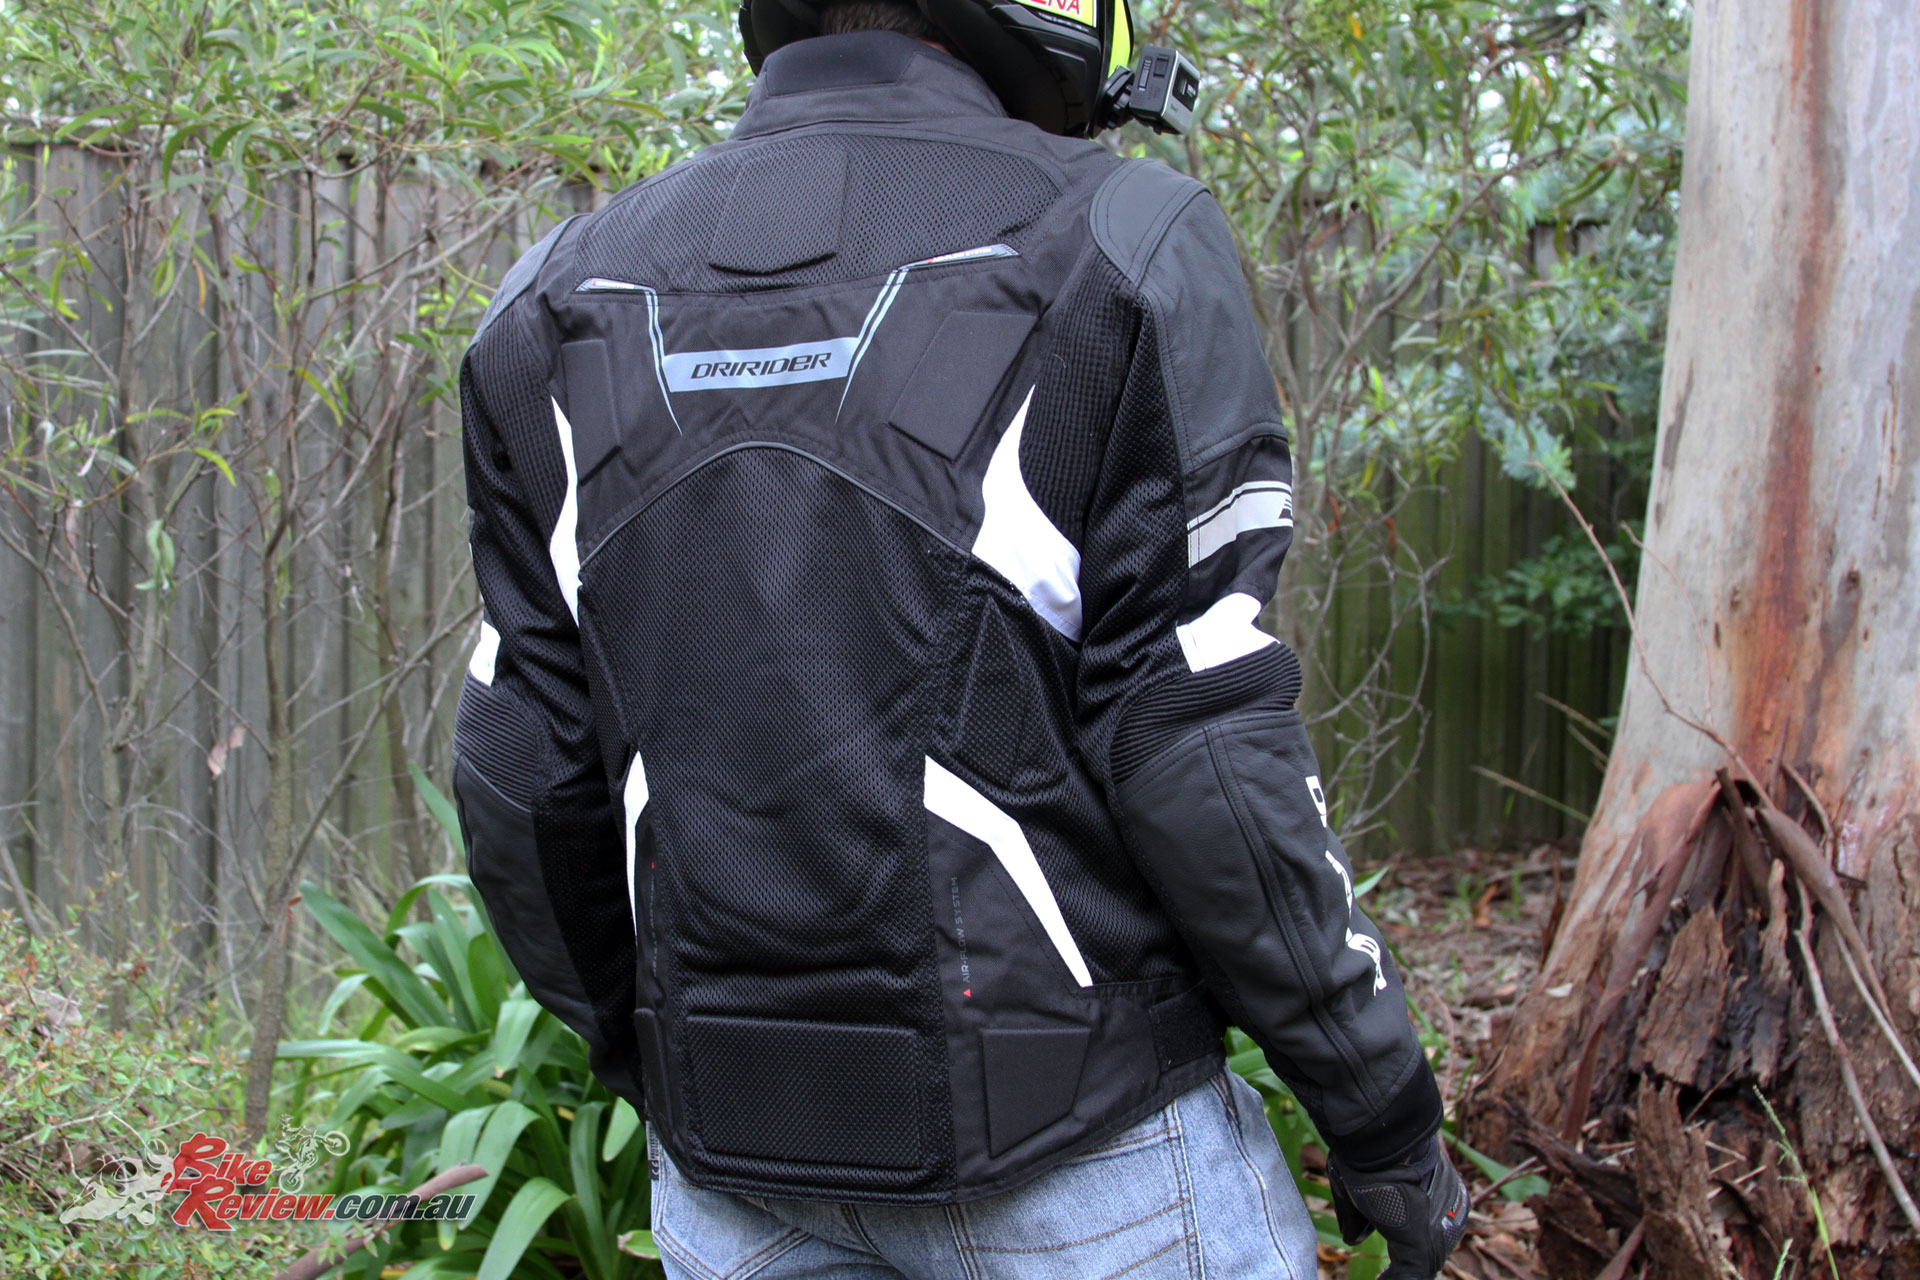 dririder climate control 2 jacket review